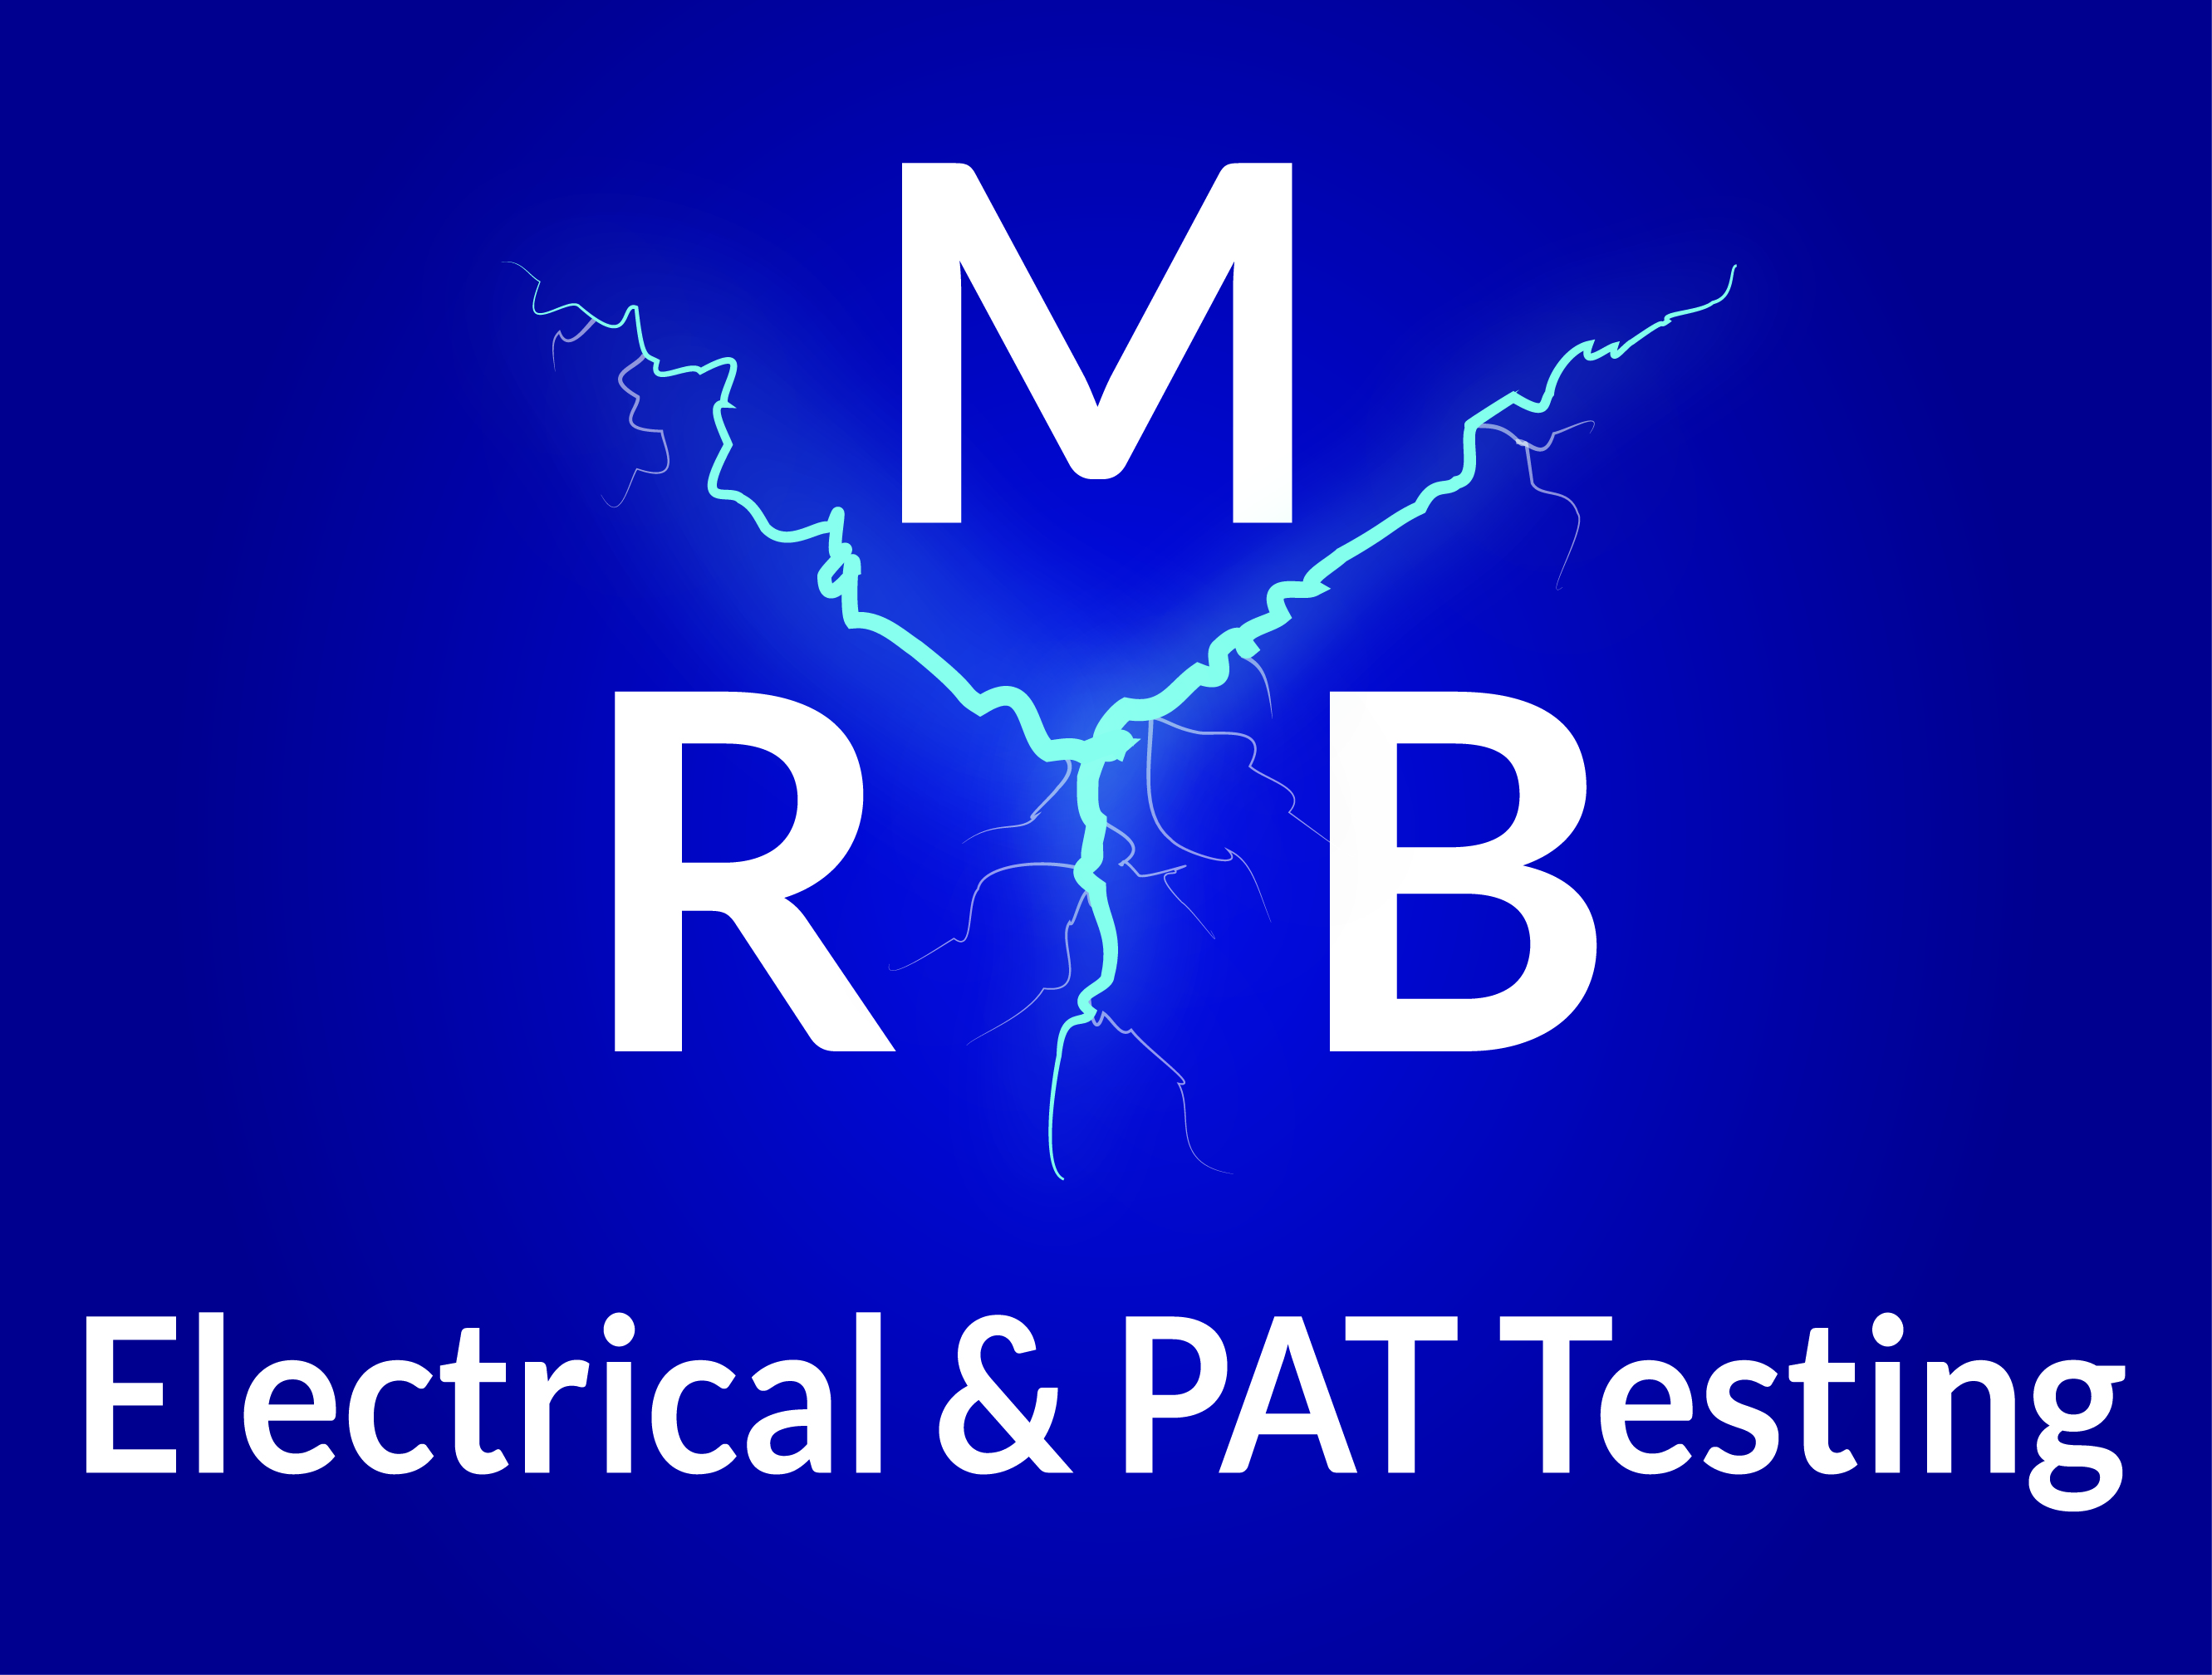 Who and What is affected by PAT Testing